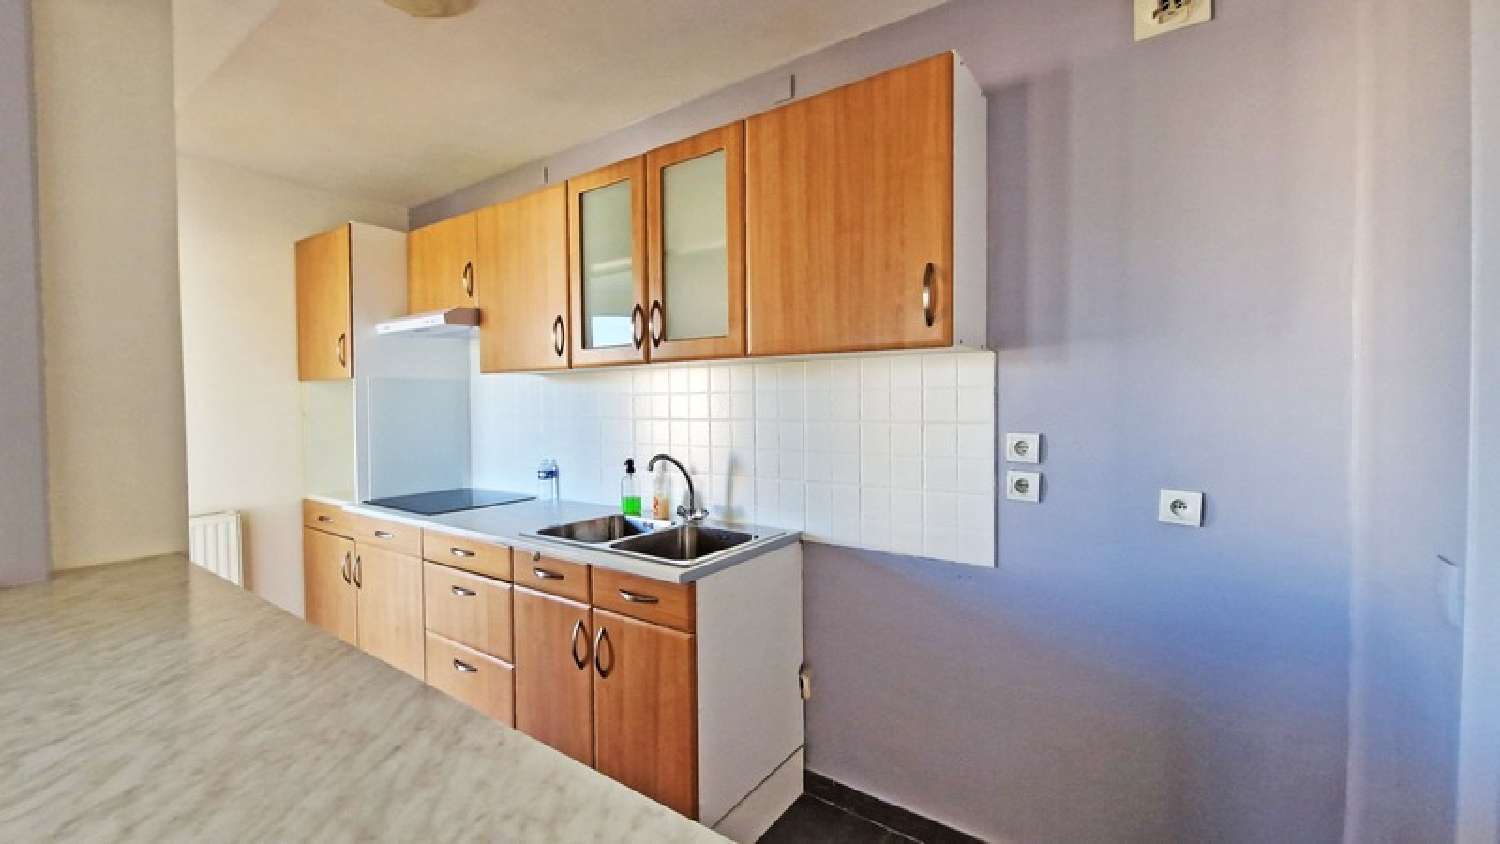  kaufen Wohnung/ Apartment Soisy-sous-Montmorency Val-d'Oise 5